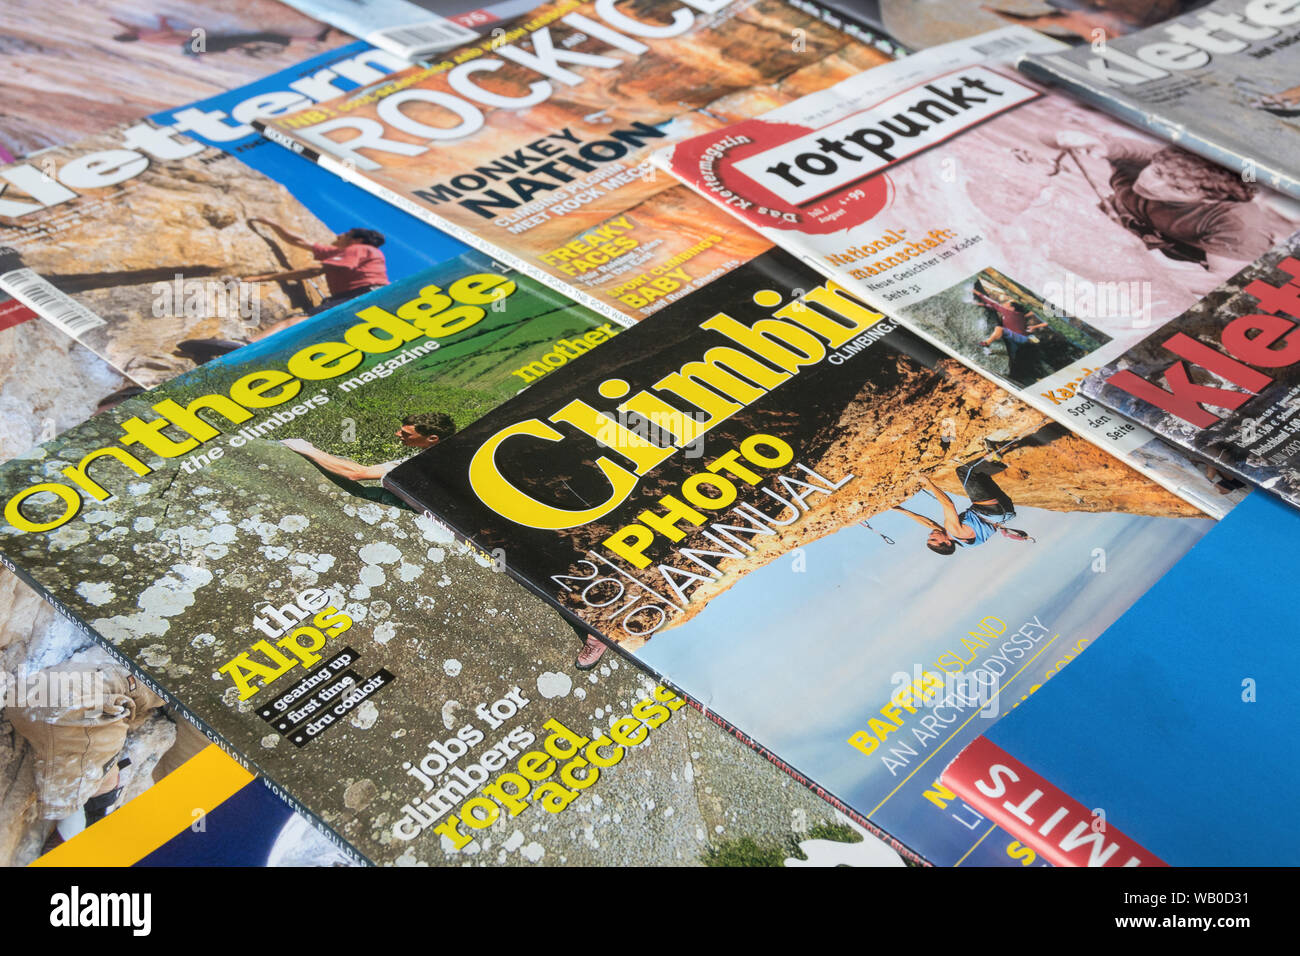 UTRECHT, THE NETHERLANDS - AUGUST 3, 2019: Selection of climbing magazines from different countries. Covers from Klettern, Urban Climber, Climbing, Ro Stock Photo